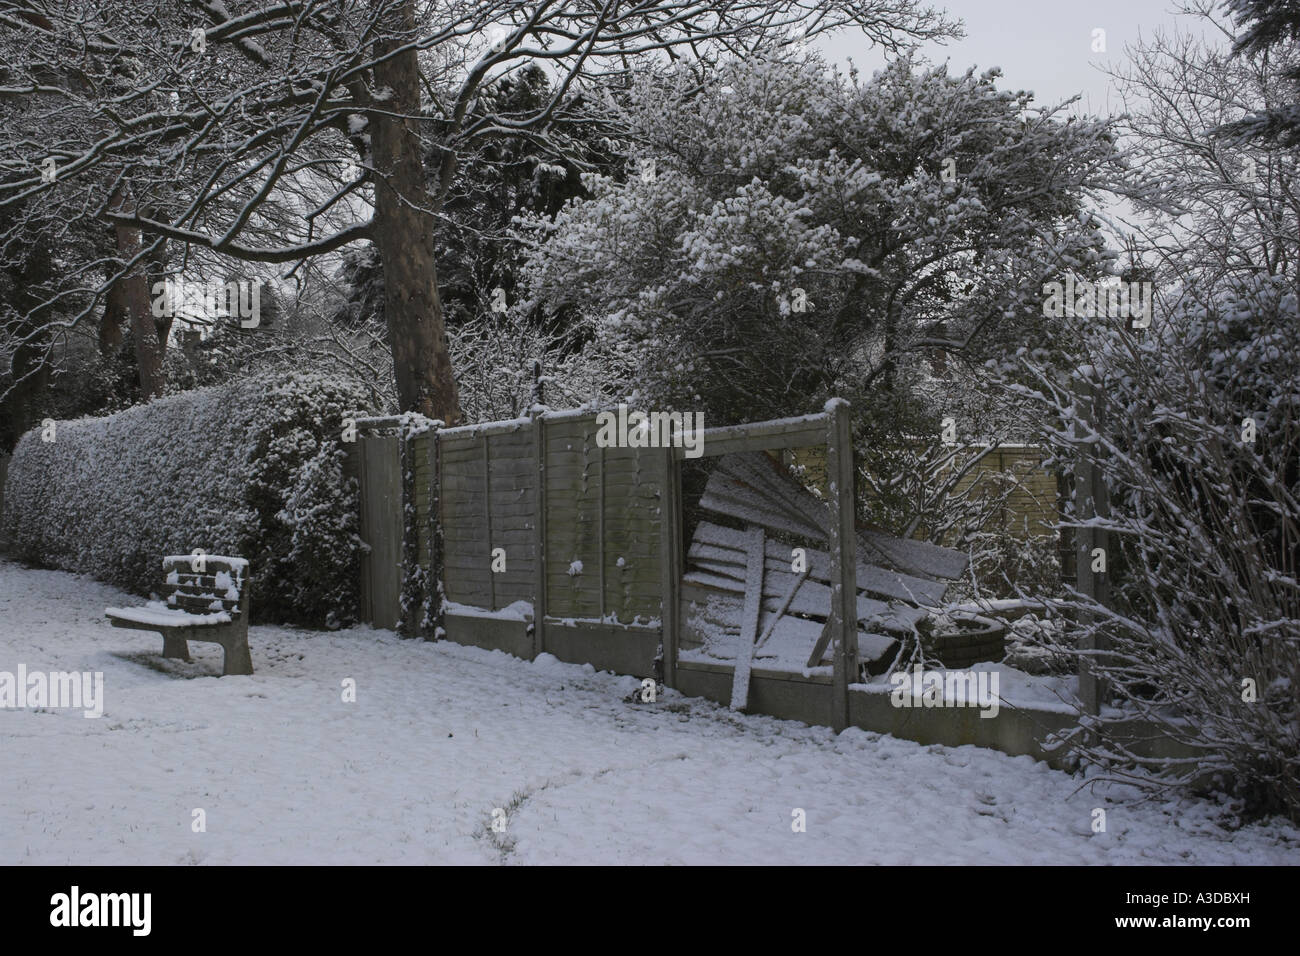 A picturesque scene after overnight snow. Stock Photo